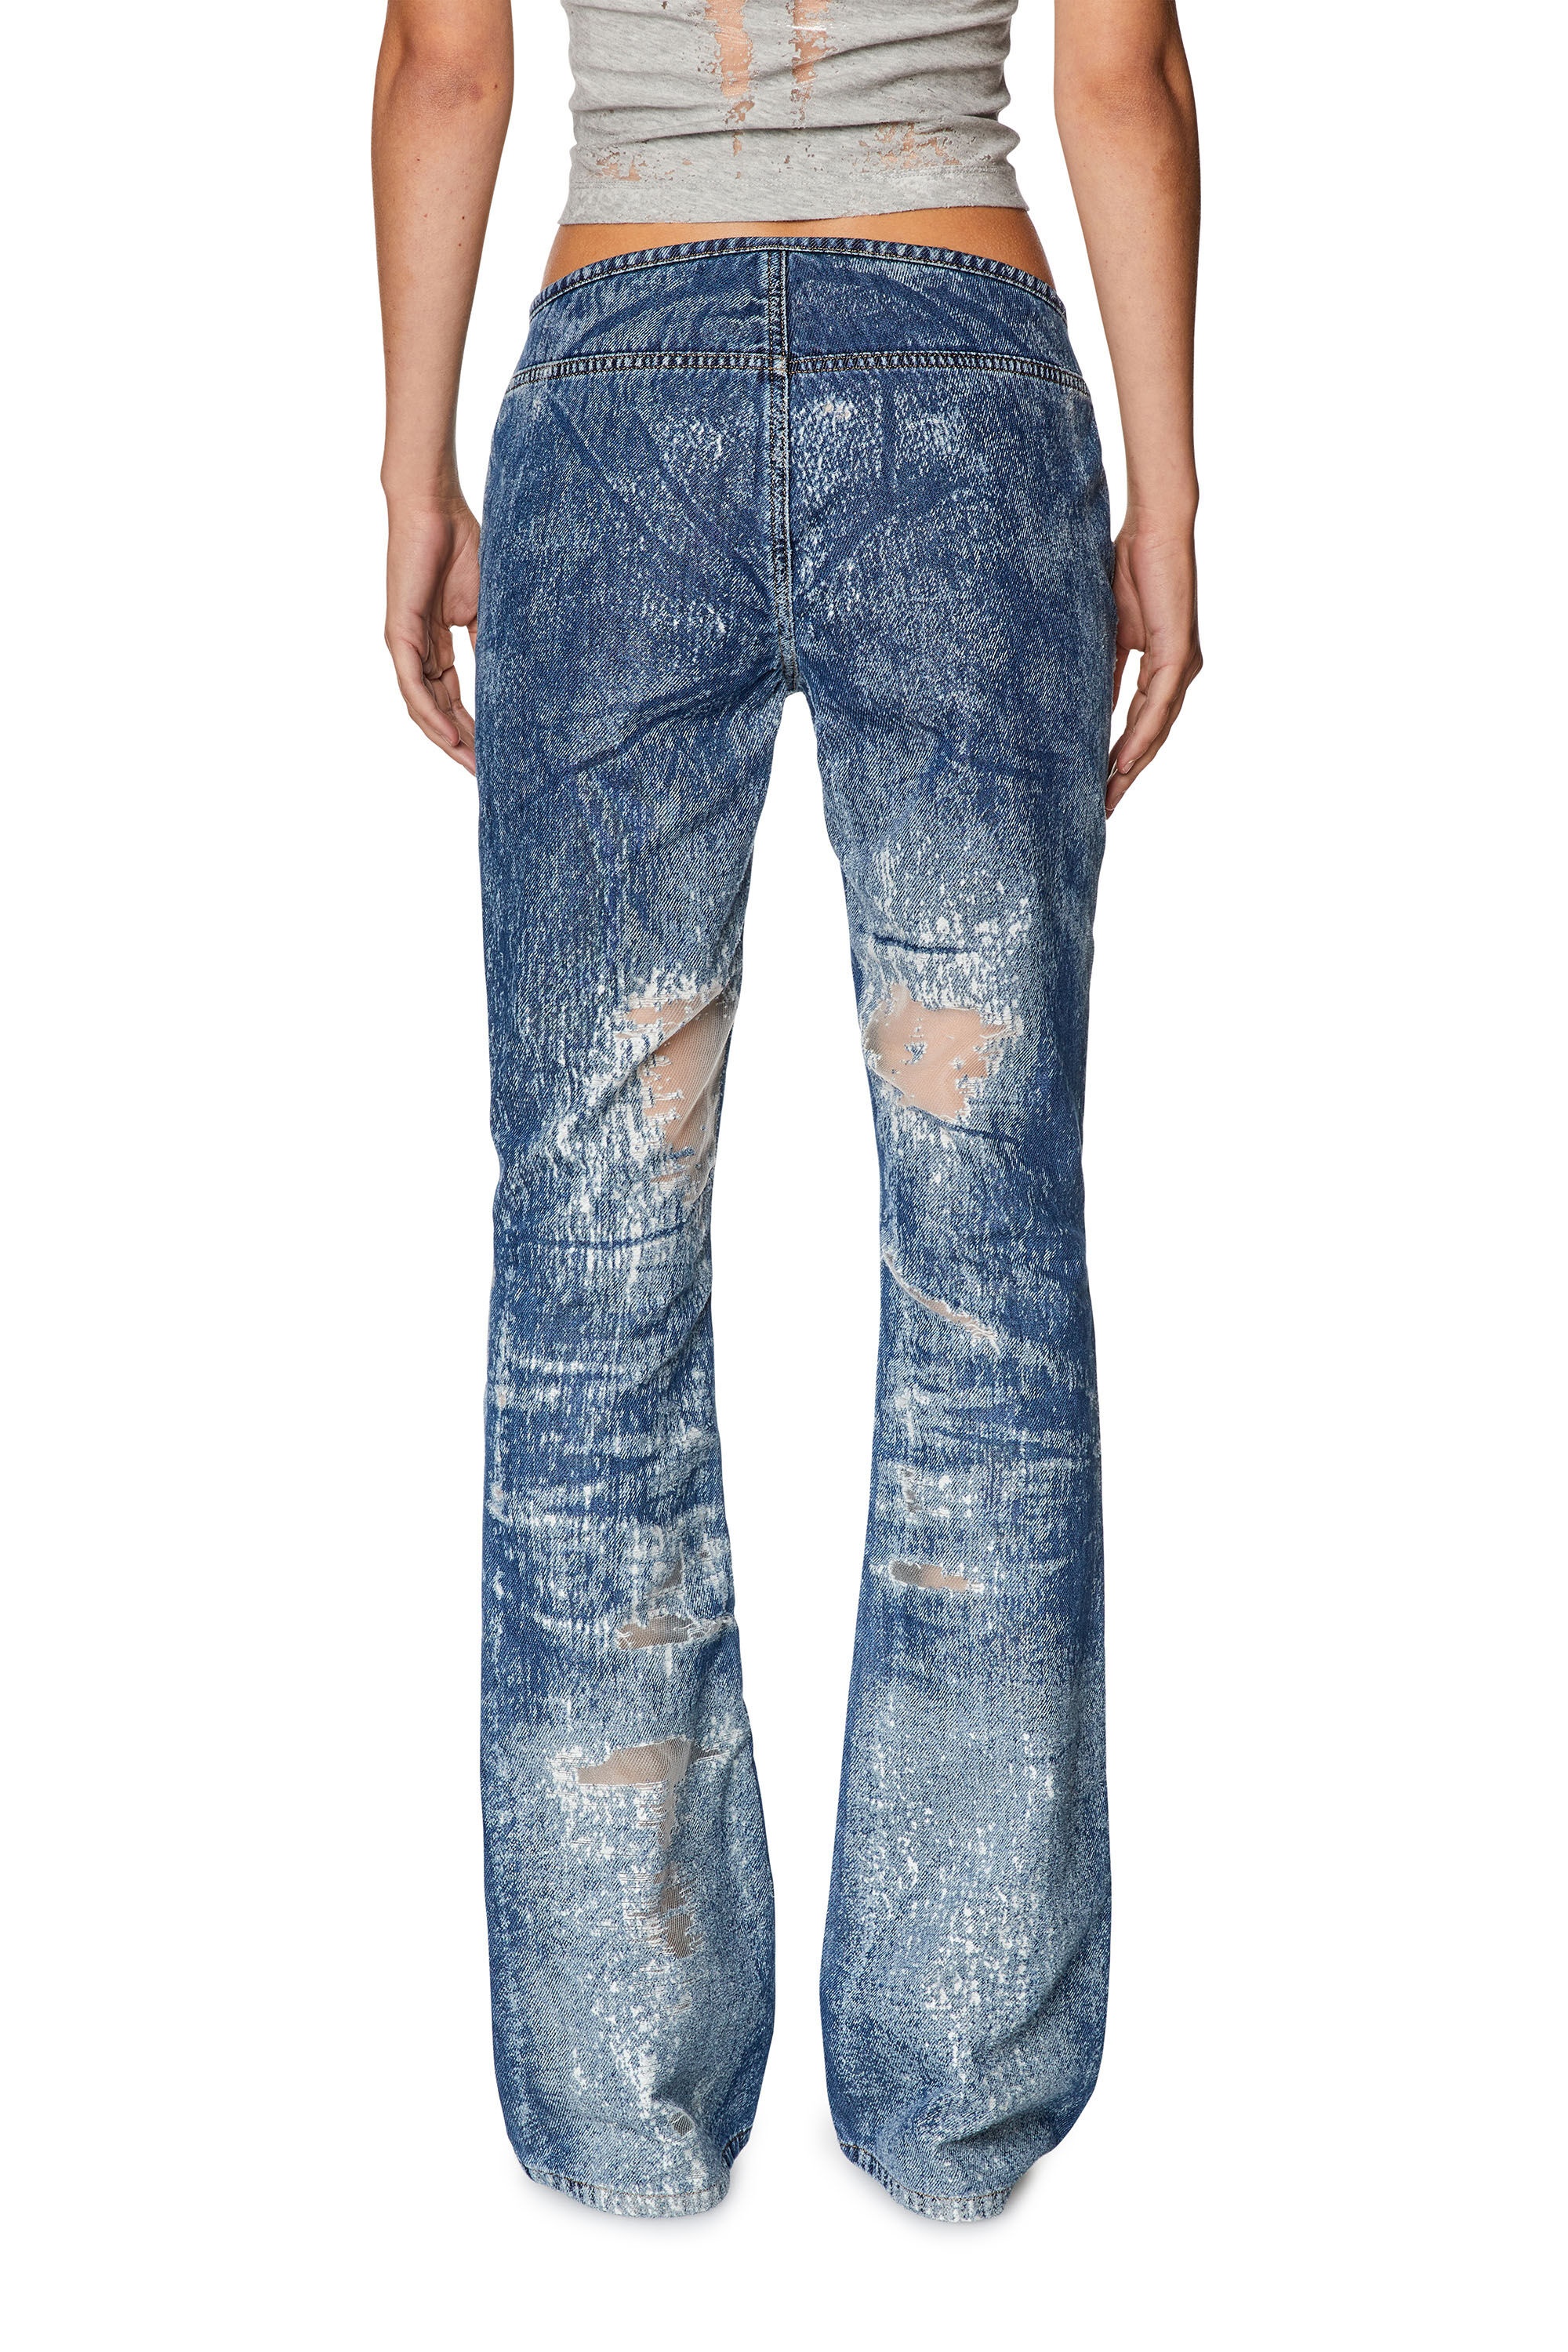 BOOTCUT AND FLARE JEANS D-SHARK 068JH - 5